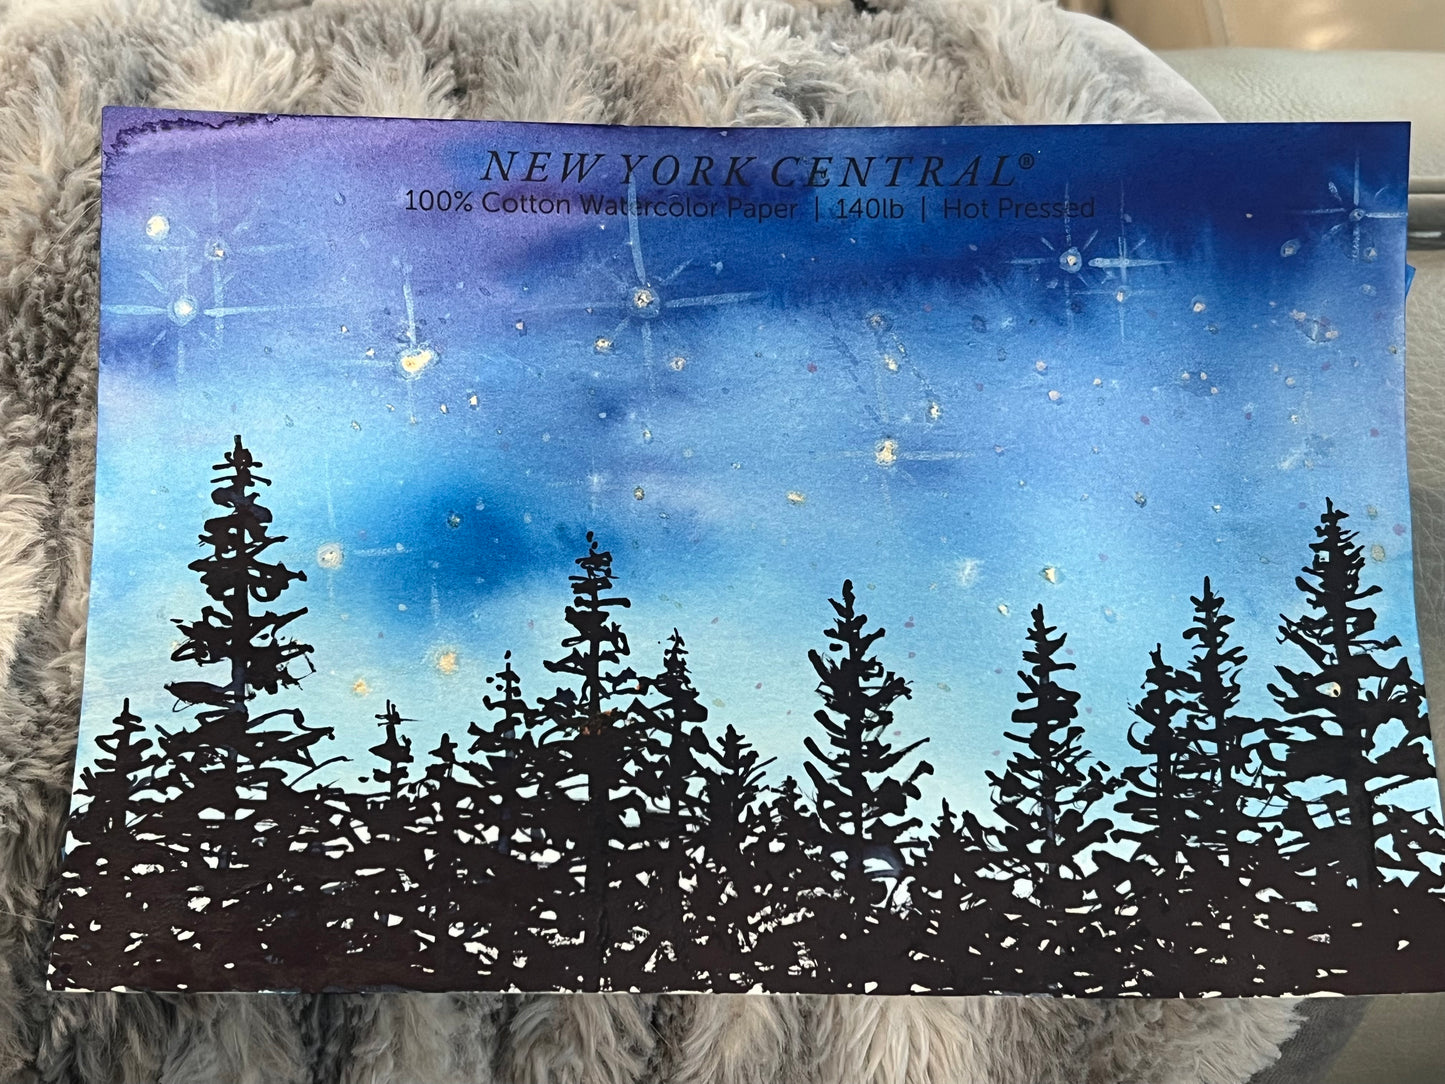 Framed Original Watercolor Art - "Fading Blues" Alpine Forest Night Stars in horizonal fade of blues by Christie Marie